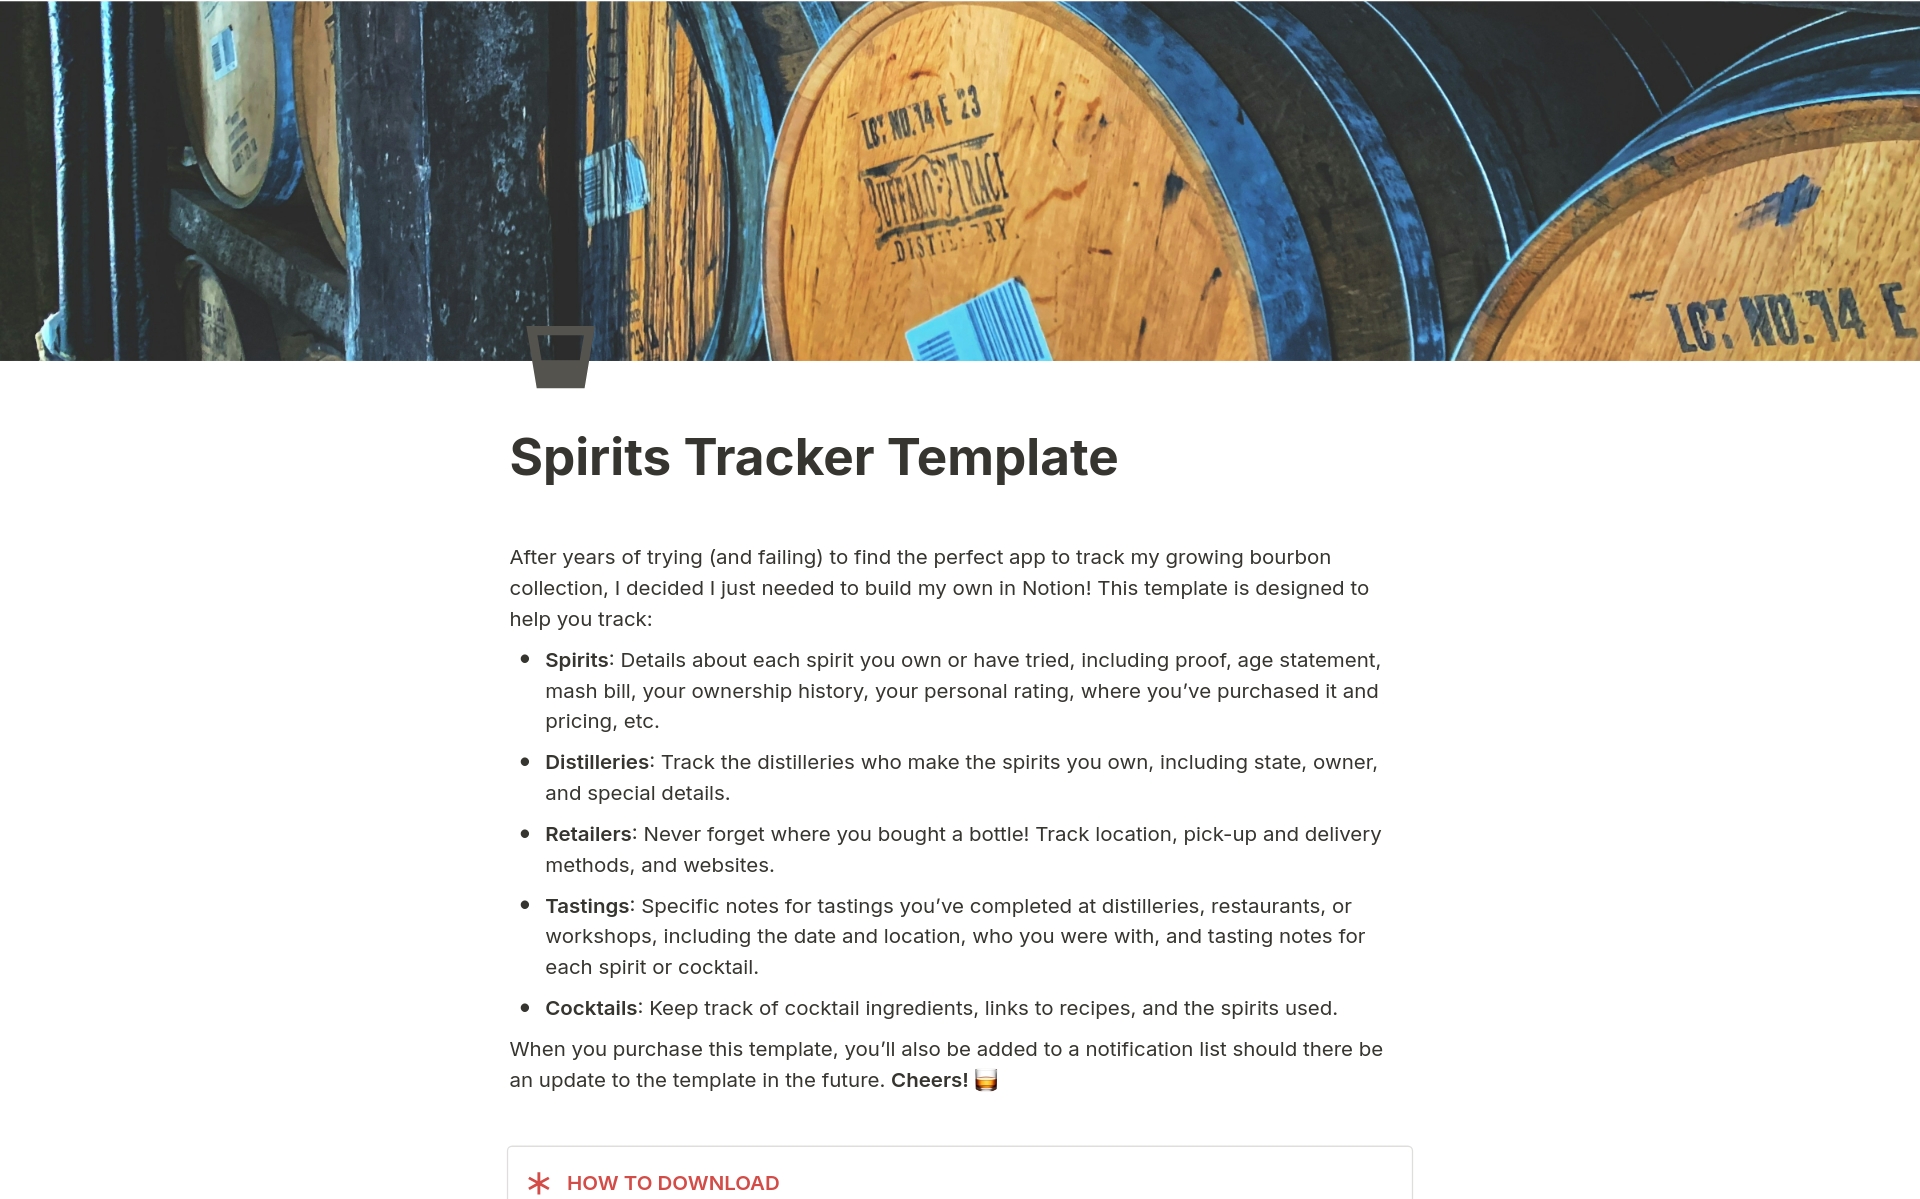 A template preview for Spirits Tracker